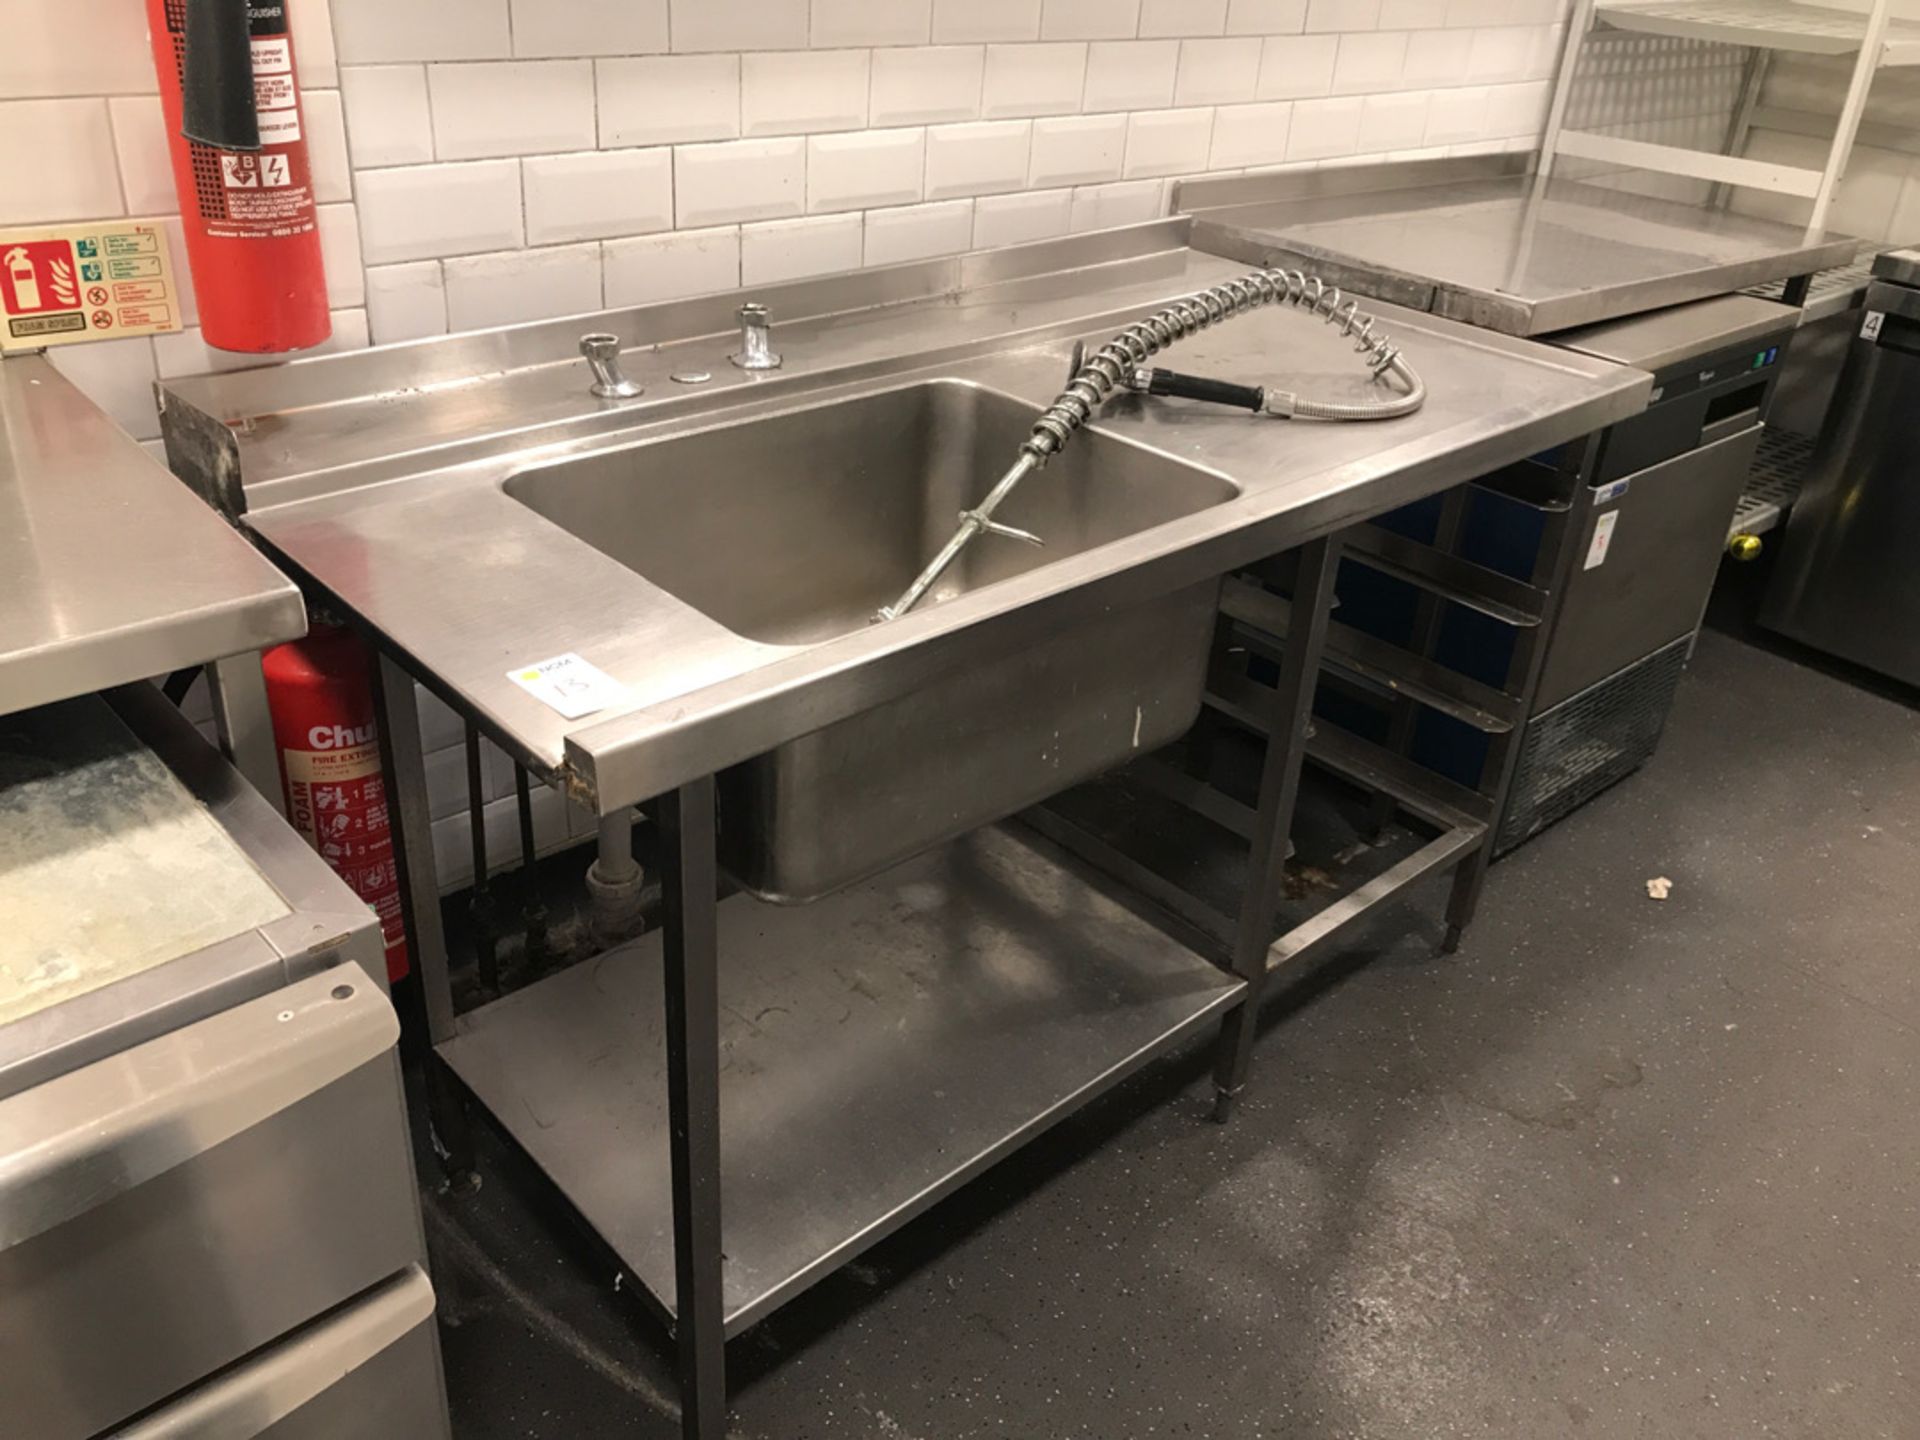 Single Stainless Steel Sink Unit with Spray Tap